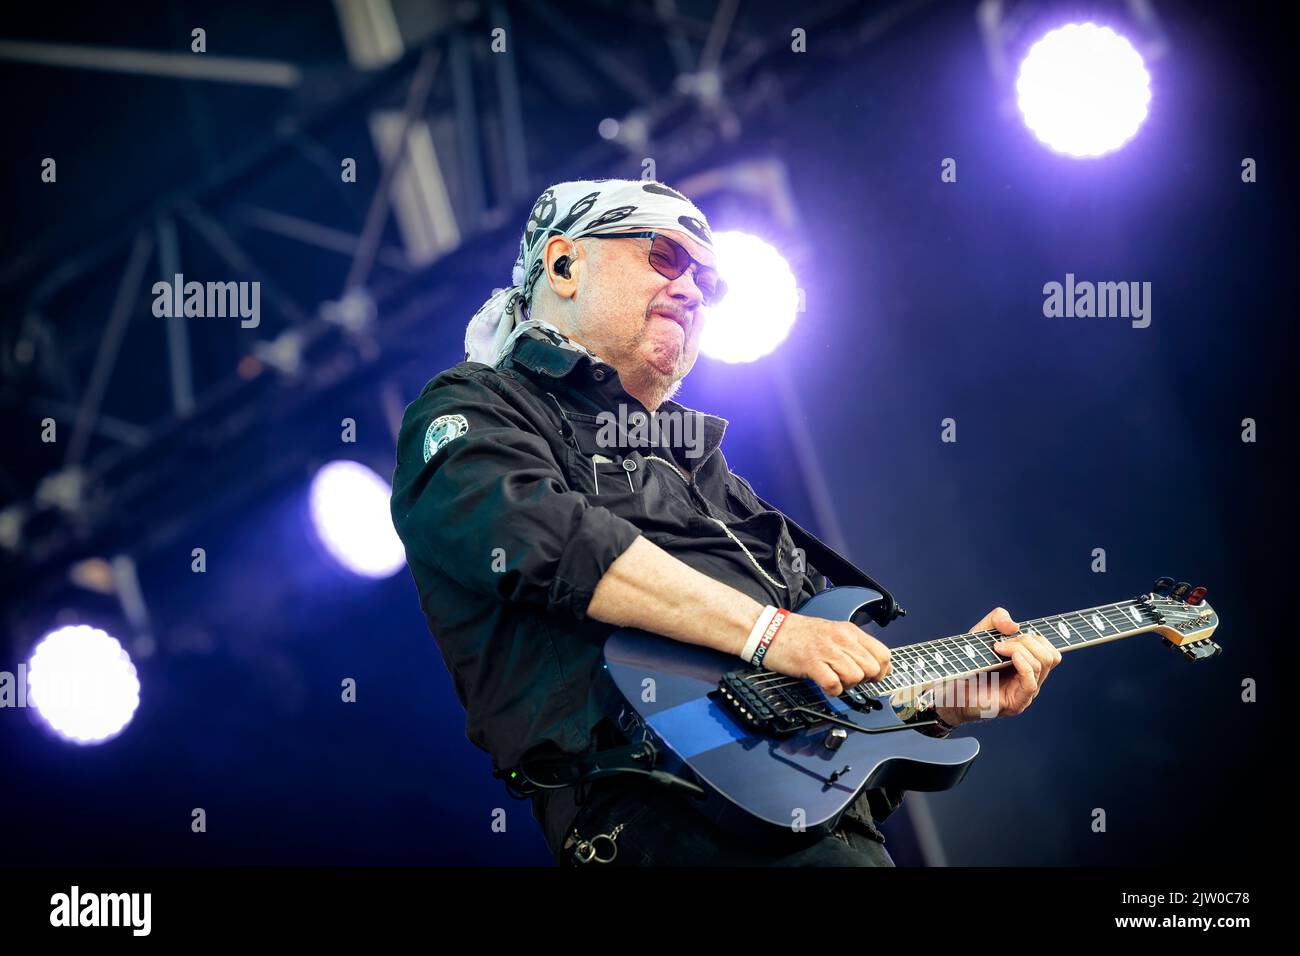 Solvesborg, Sweden. 10th, June 2022. The British heavy metal band Saxon performs a live concert during the Swedish music festival Sweden Rock Festival 2022 in Solvesborg. Here guitarist Paul Quinn is seen live on stage. (Photo credit: Gonzales Photo - Terje Dokken). Stock Photo